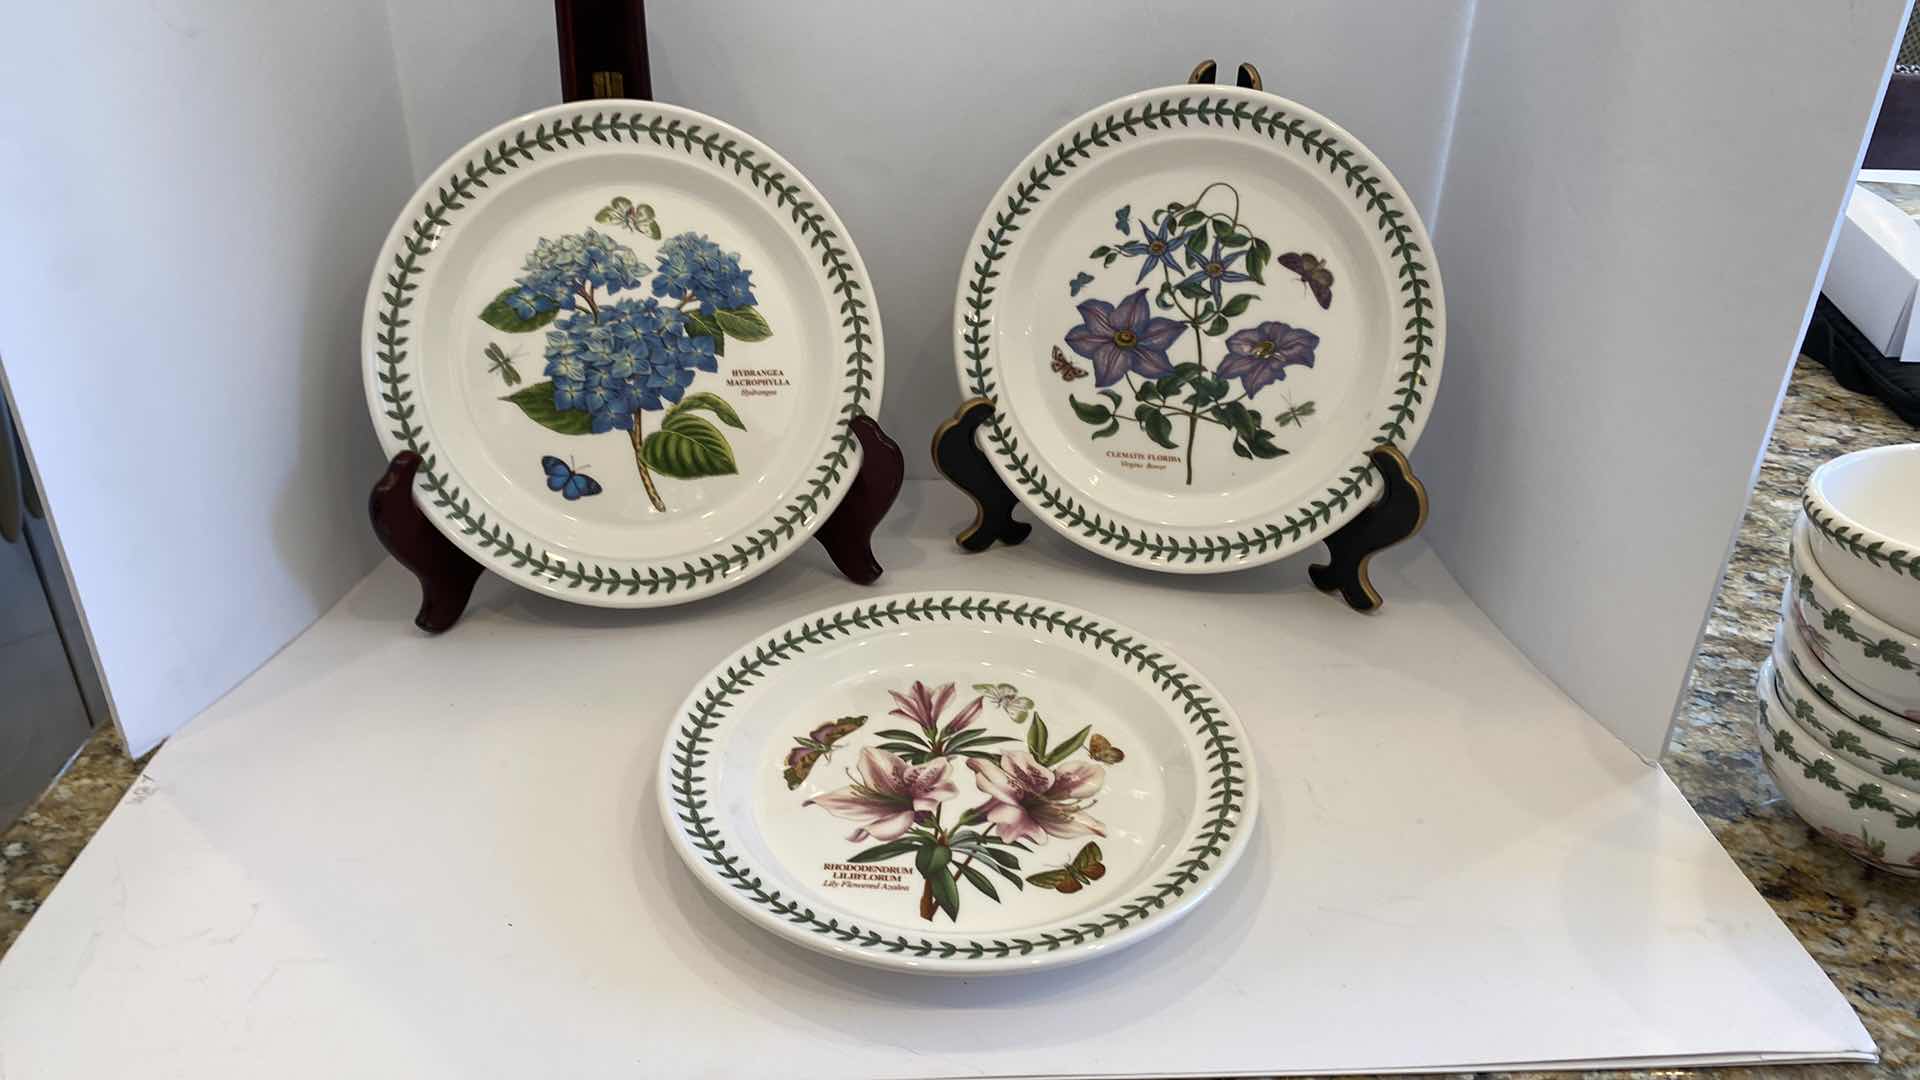 Photo 2 of POMONA PORT MADE IN ENGLAND CEREAL BOWLS AND BOTANIC GARDEN PLATES BY SUSAN WILLIAMS ELLIS